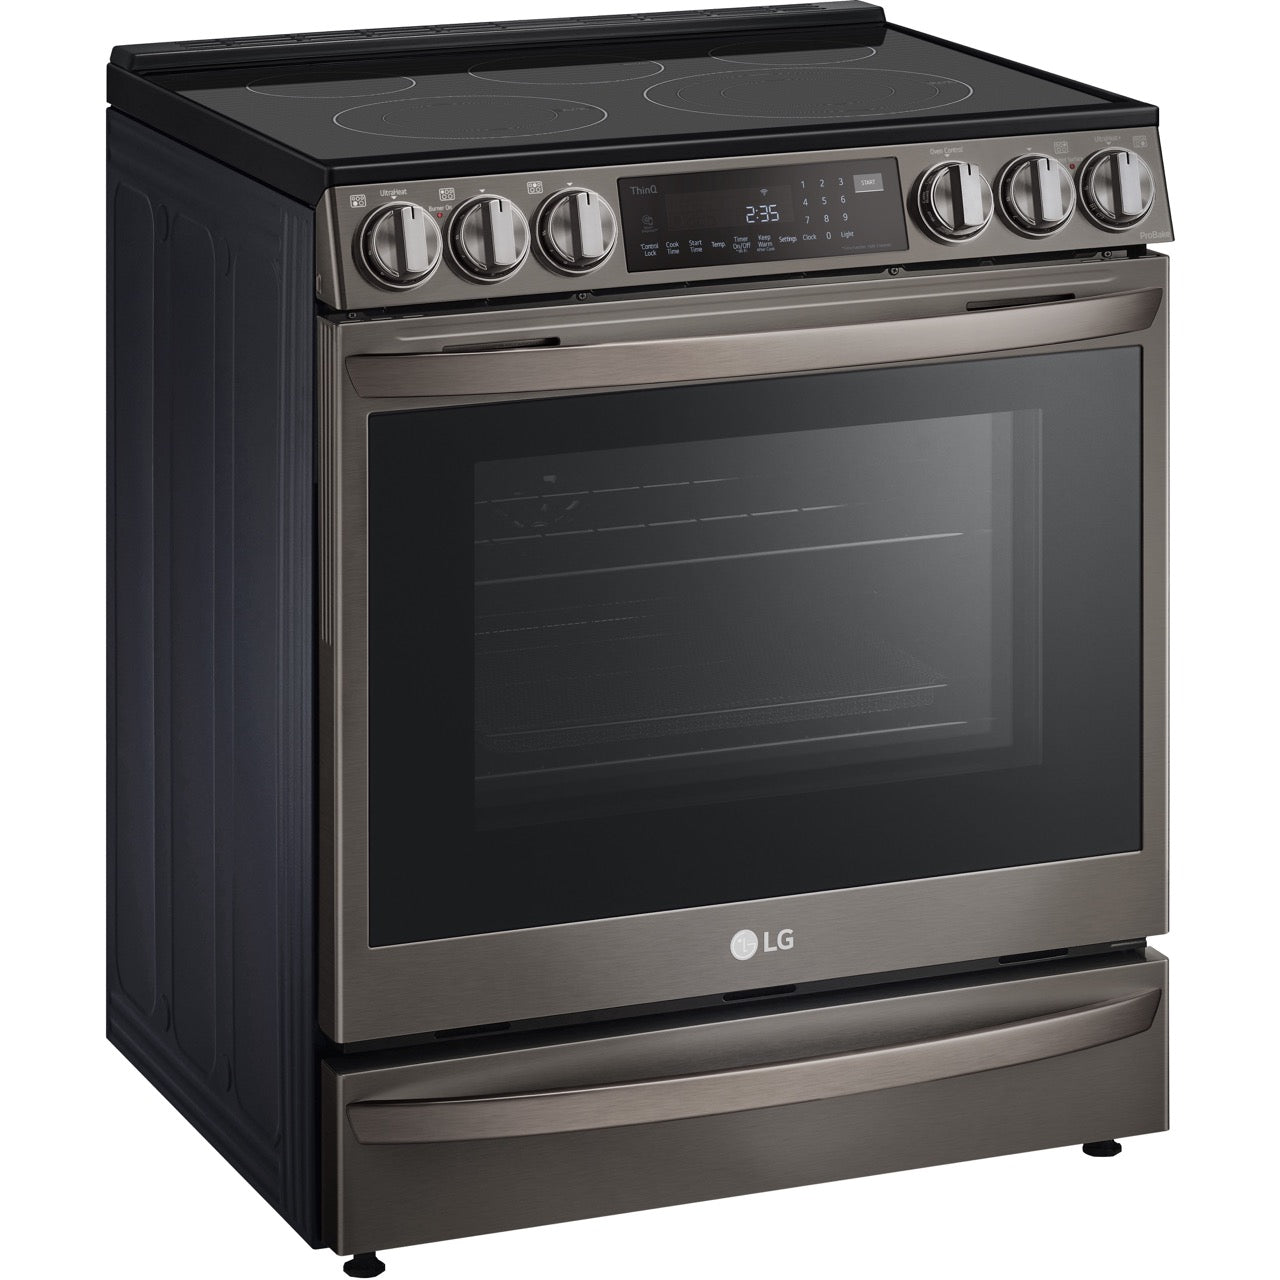 LG 6.3-Cu. Ft. Smart Wi-Fi Enabled ProBake Convection InstaView Electric Slide-in Range with Air Fry, Black Stainless Steel (LSEL6337D)